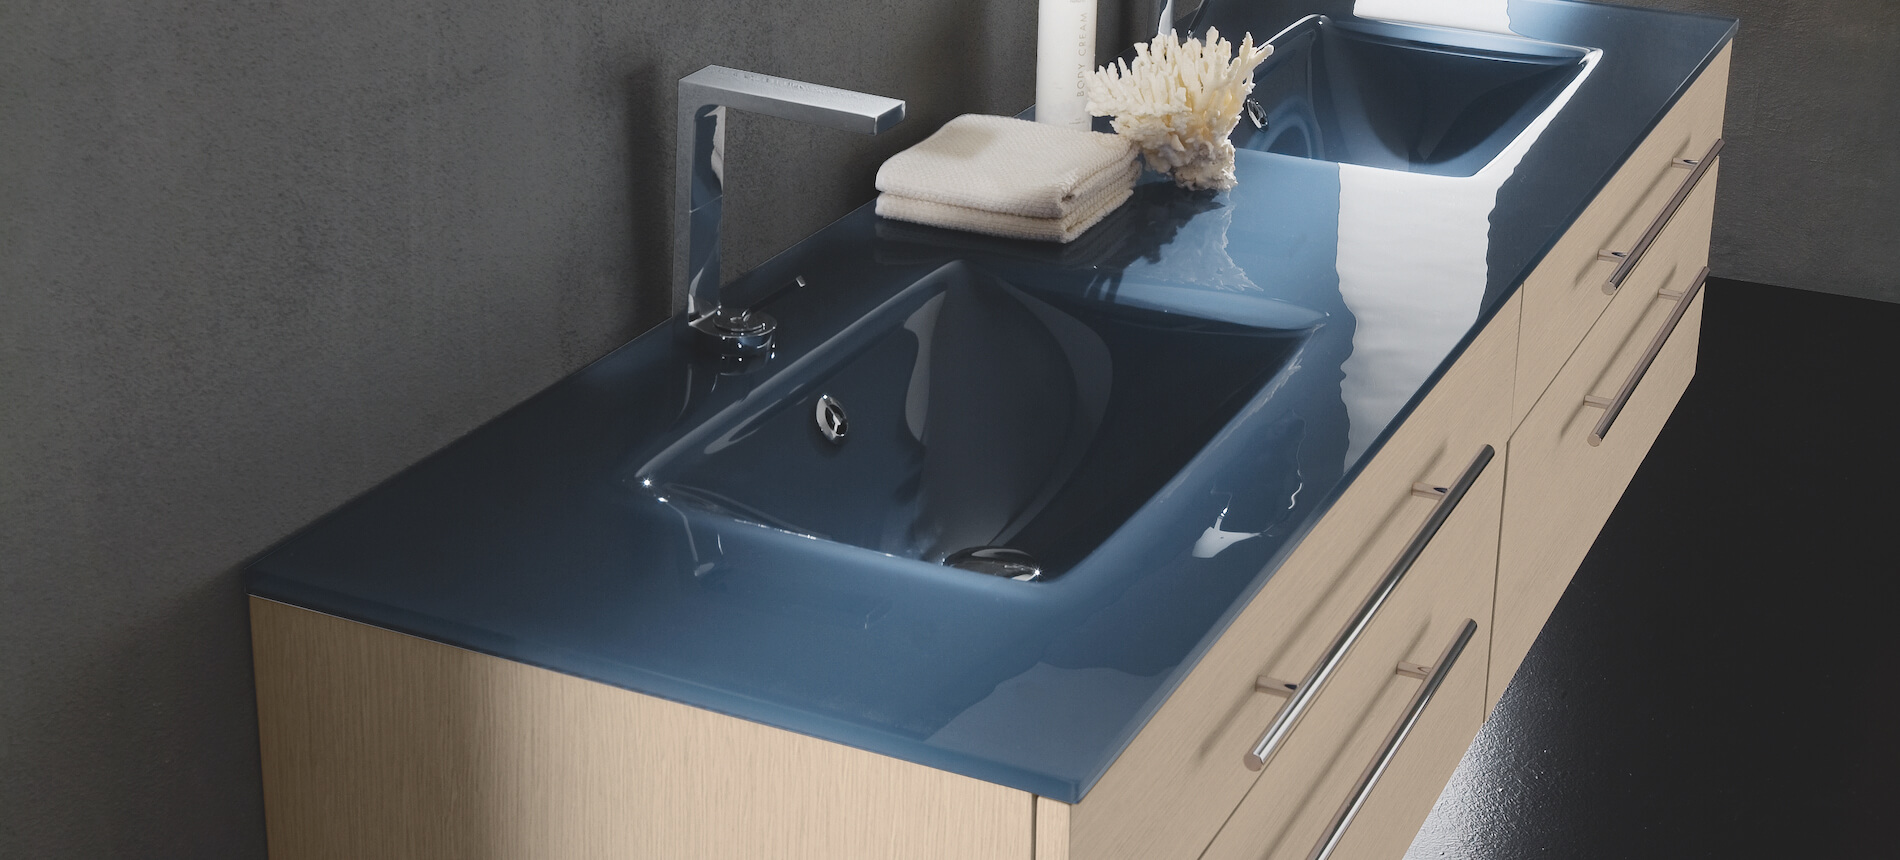 A double basin vanity with dark blue glass countertop